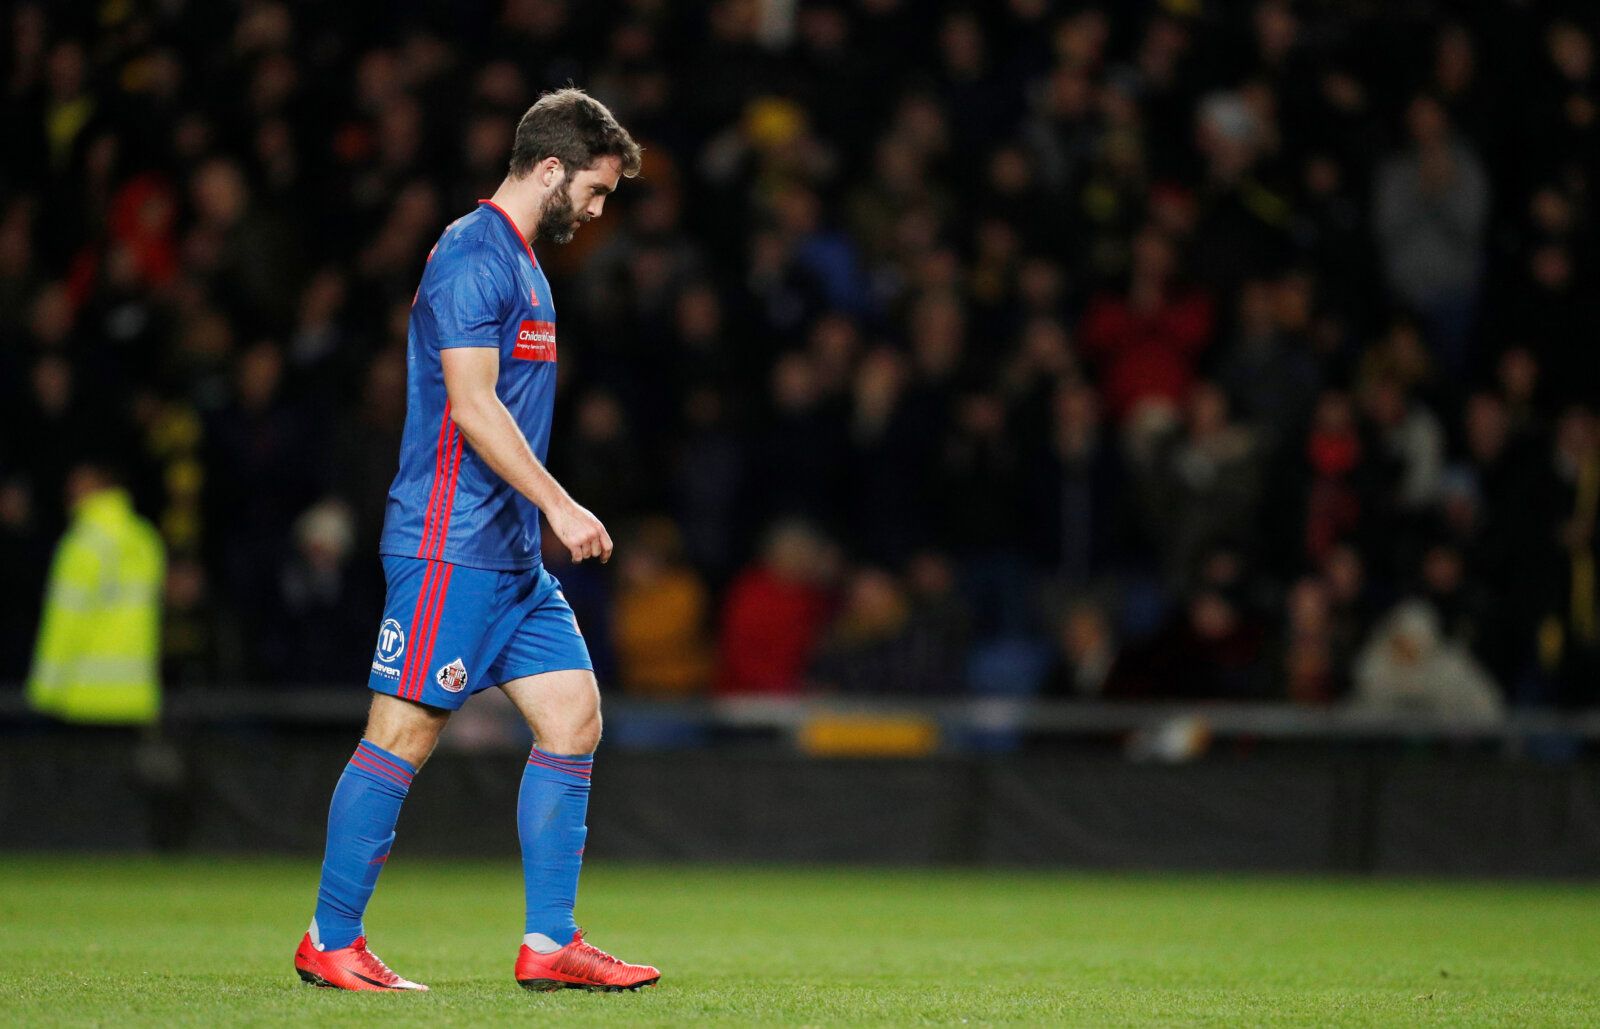 Soccer Football - Carabao Cup - Fourth Round - Oxford United v Sunderland - Kassam Stadium, Oxford, Britain - October 29, 2019  Sunderland's Will Grigg looks dejected after missing during the penalty shoot out  Action Images/John Sibley  EDITORIAL USE ONLY. No use with unauthorized audio, video, data, fixture lists, club/league logos or 